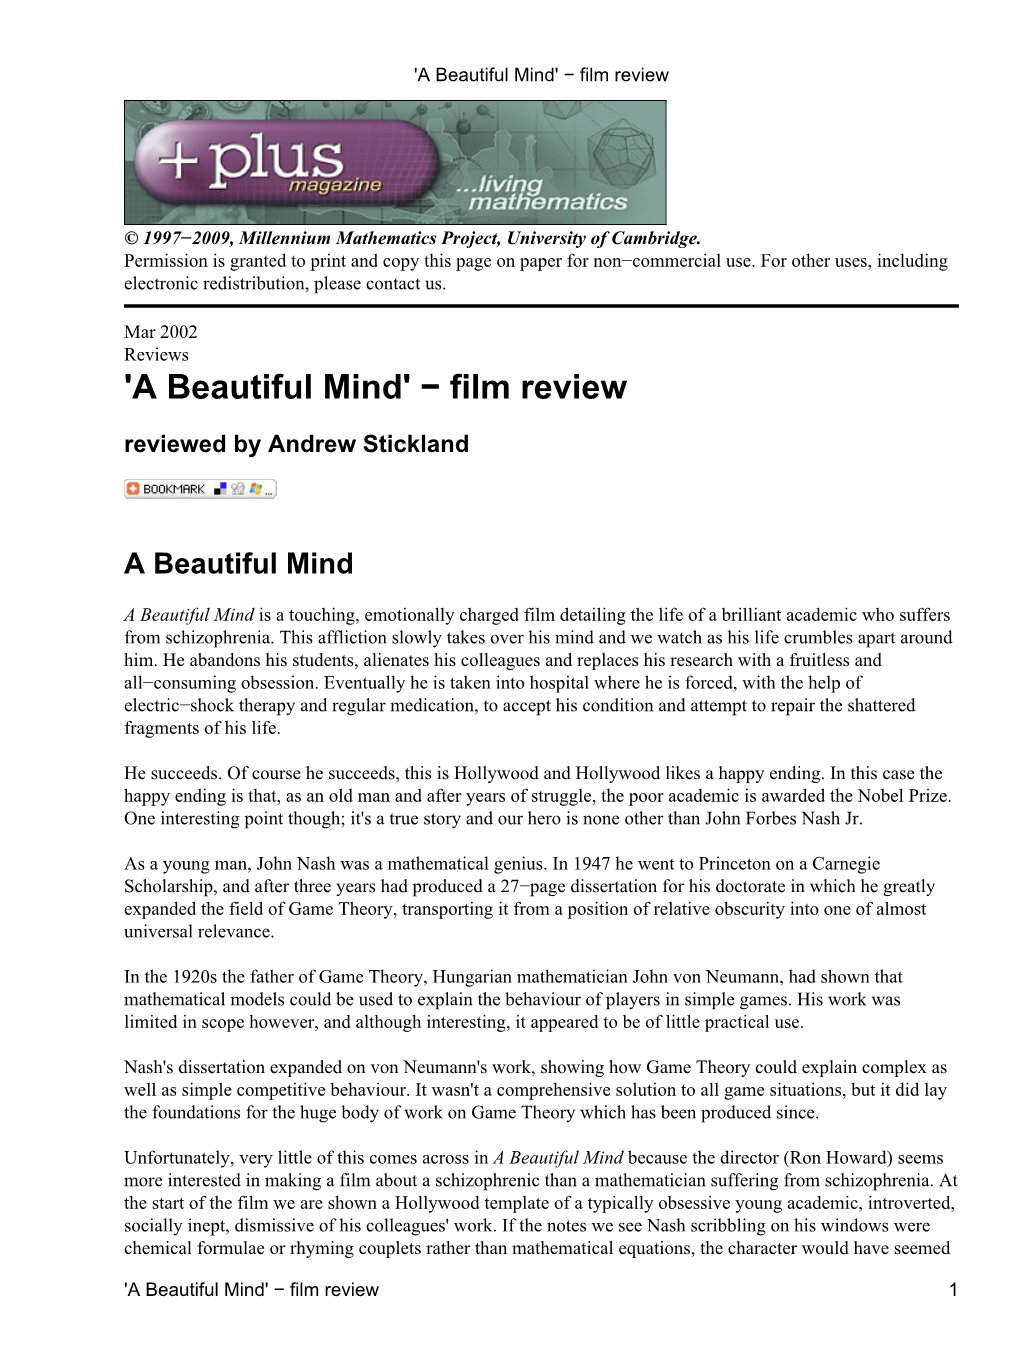 'A Beautiful Mind' − Film Review